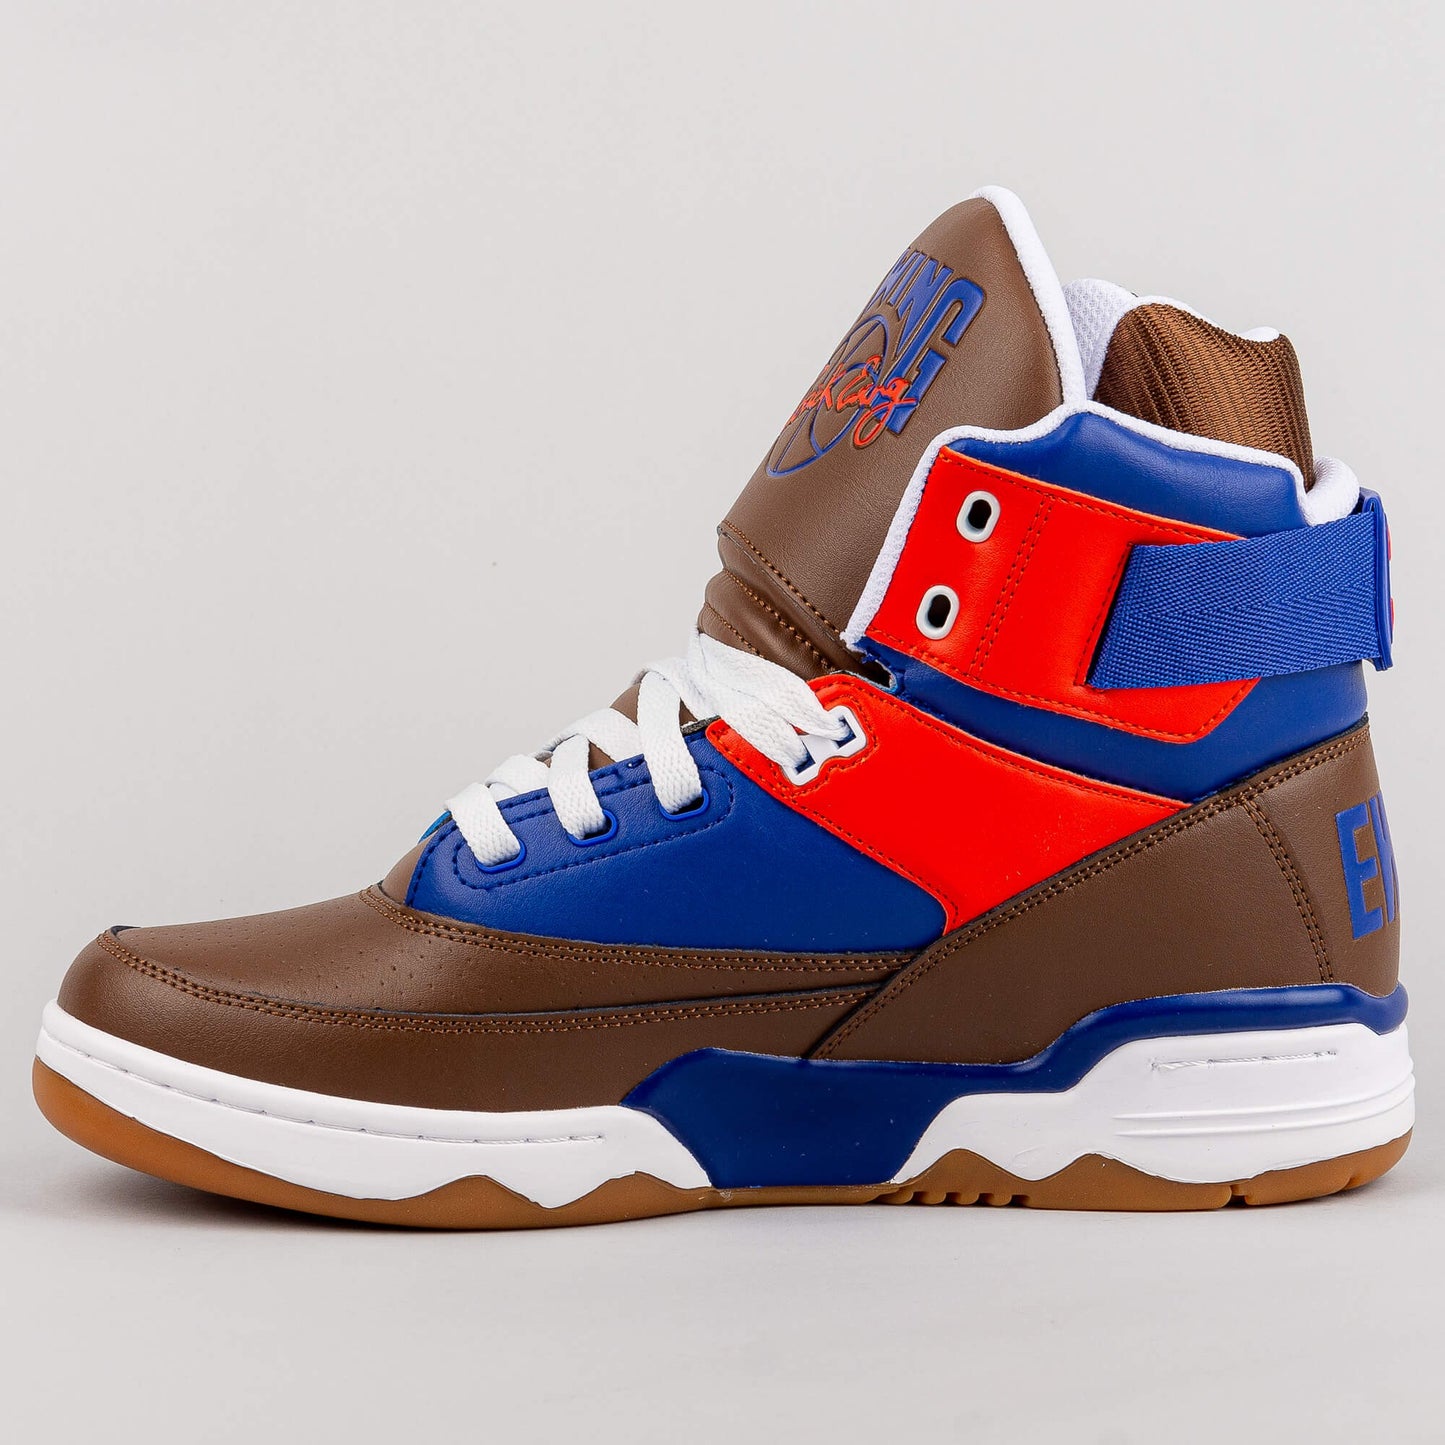 Ewing Athletics 33 HI WINTER x Snickers white/brown/royal/red